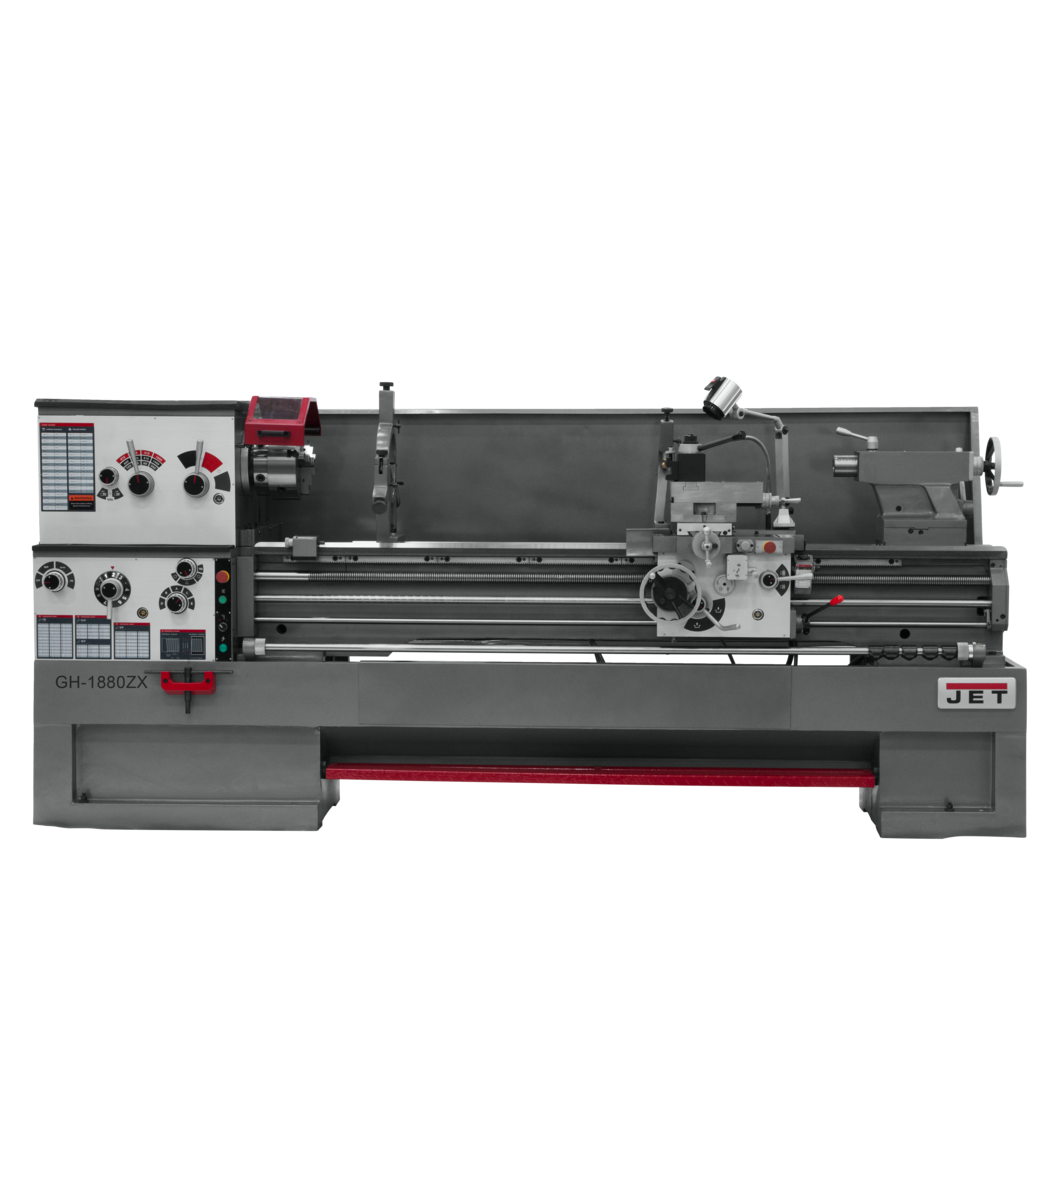 321487, GH-1880ZX Lathe with 2-axis ACU-RITE DRO 203 Installed, Jet, Metalworking, Turning, Lathes